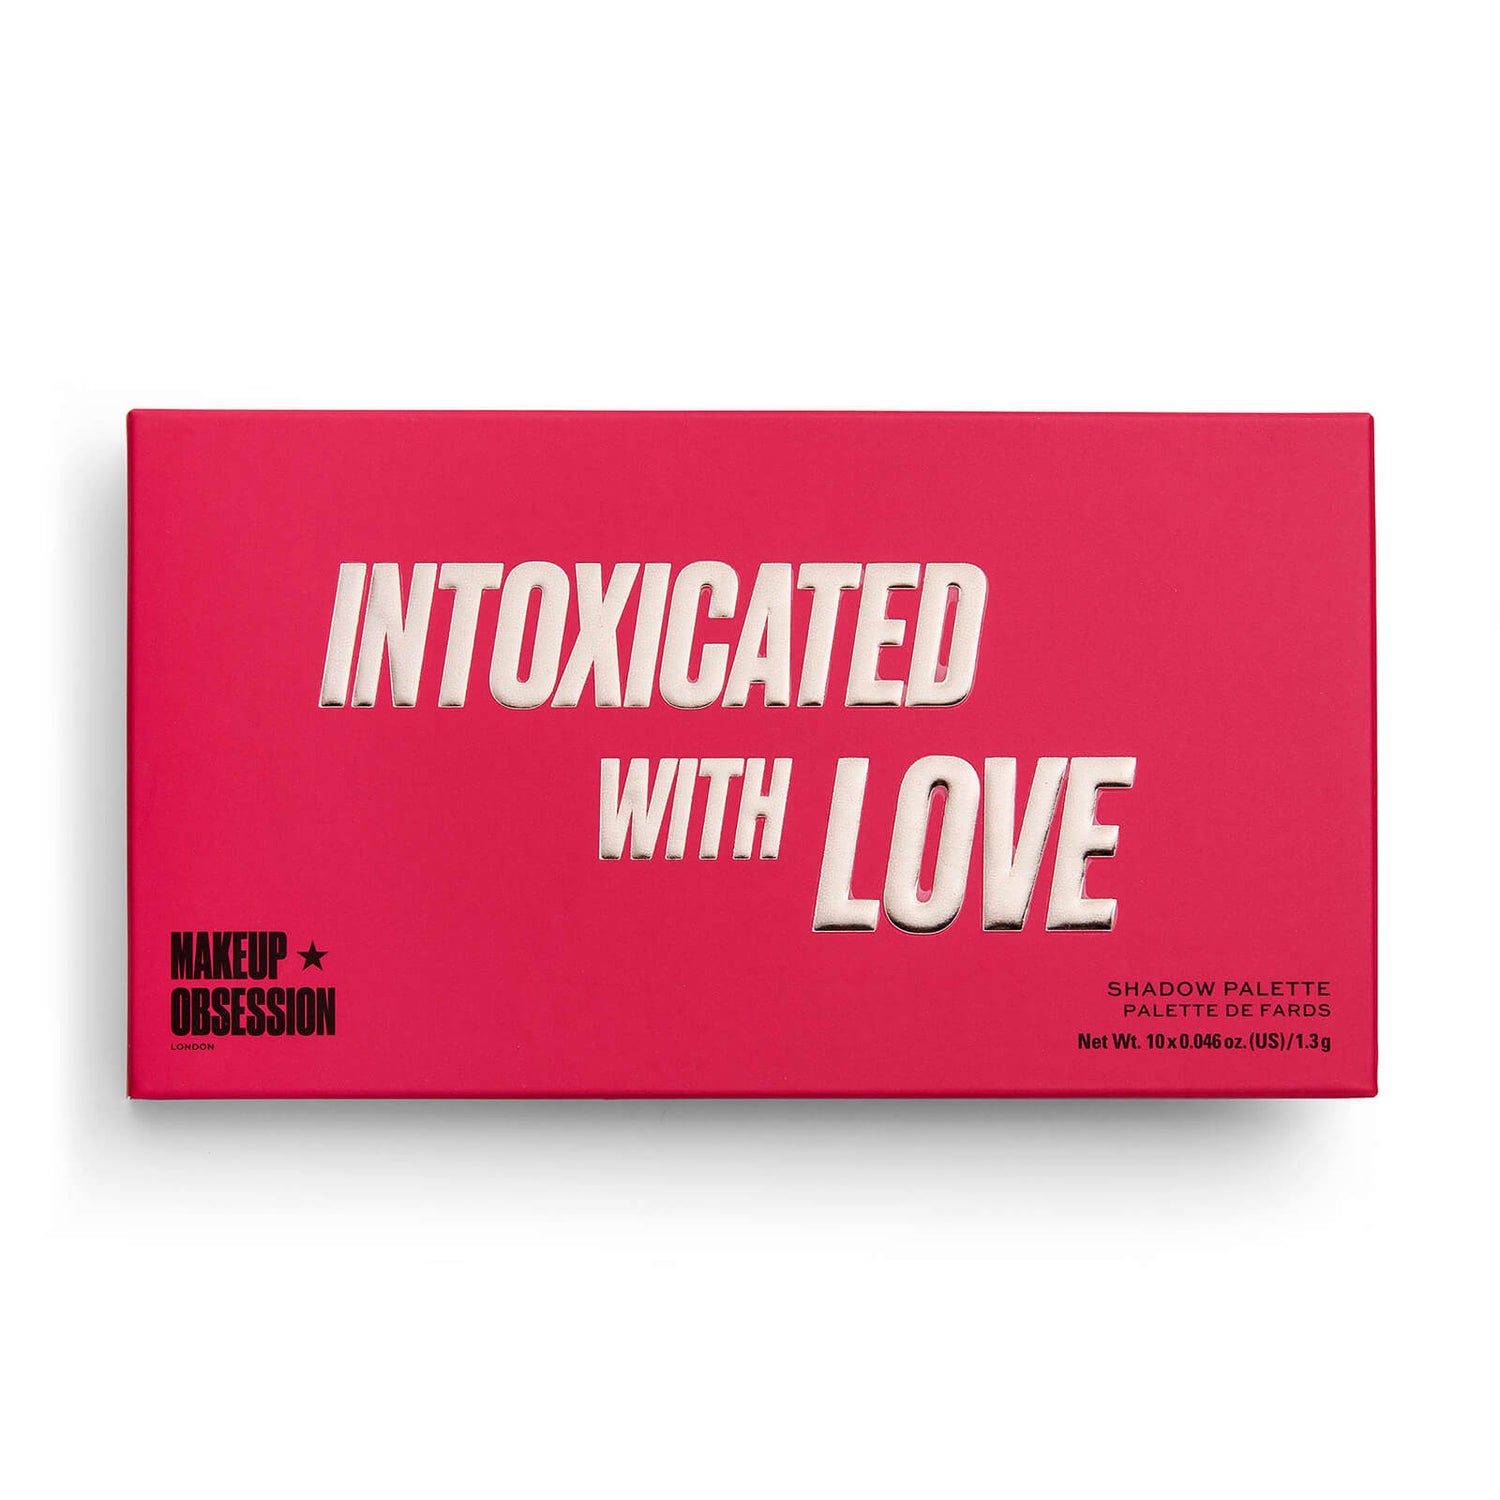 Makeup Obsession Eye Shadow Palette - Intoxicated by Love